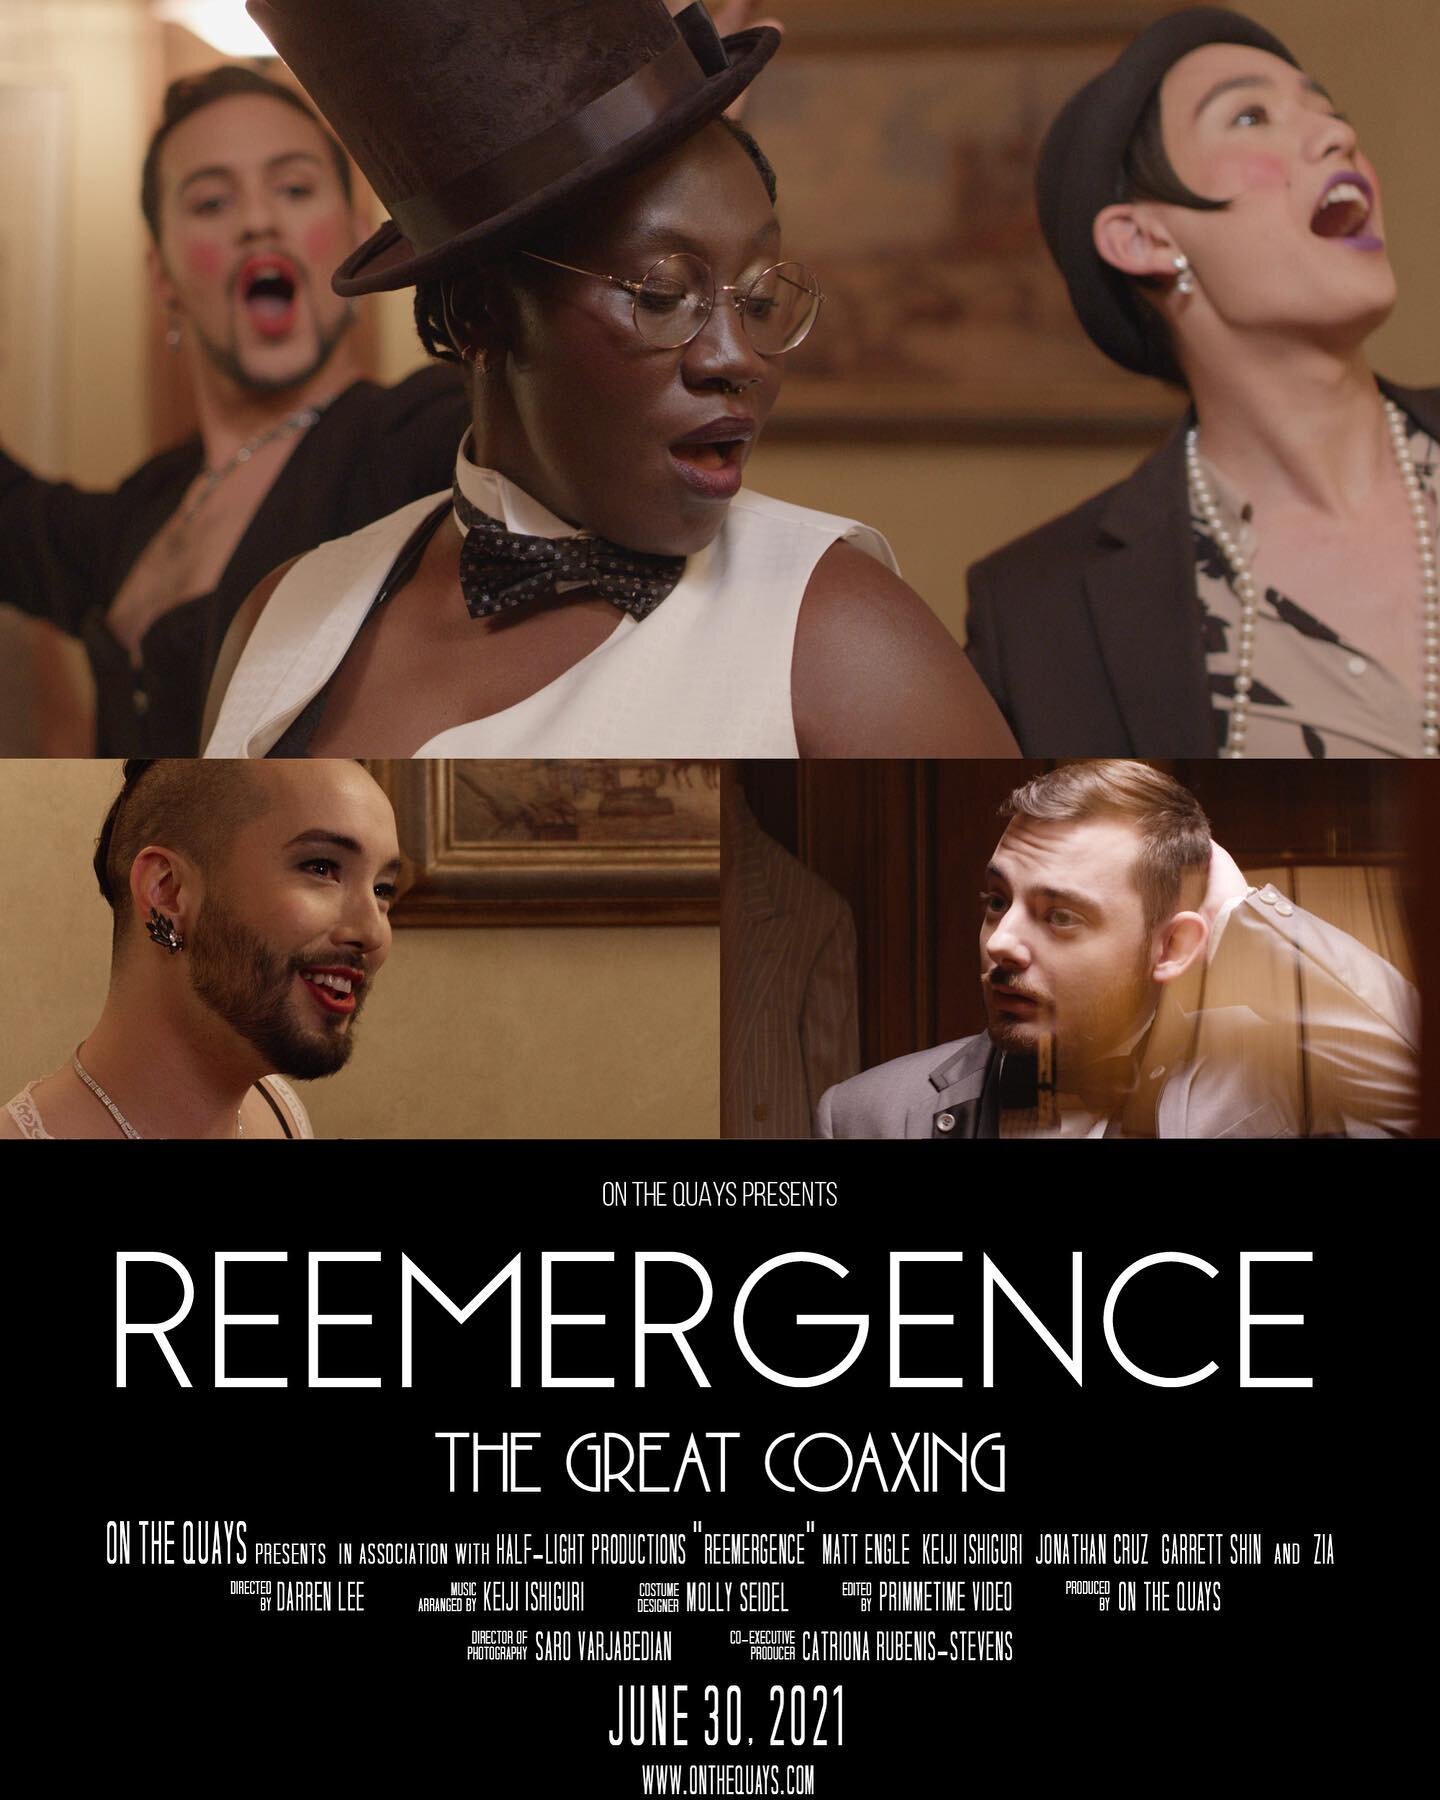 🎥 LIGHTS! CAMERA! ACTION! 🍿 
Don&rsquo;t miss the digital premiere of @Onthequays &ldquo;REEMERGENCE: A Queer Visual Album!&rdquo; TONIGHT! 🏳️&zwj;🌈 
Getting the chance to work on this project as a video editor was nothing short of incredible. Th